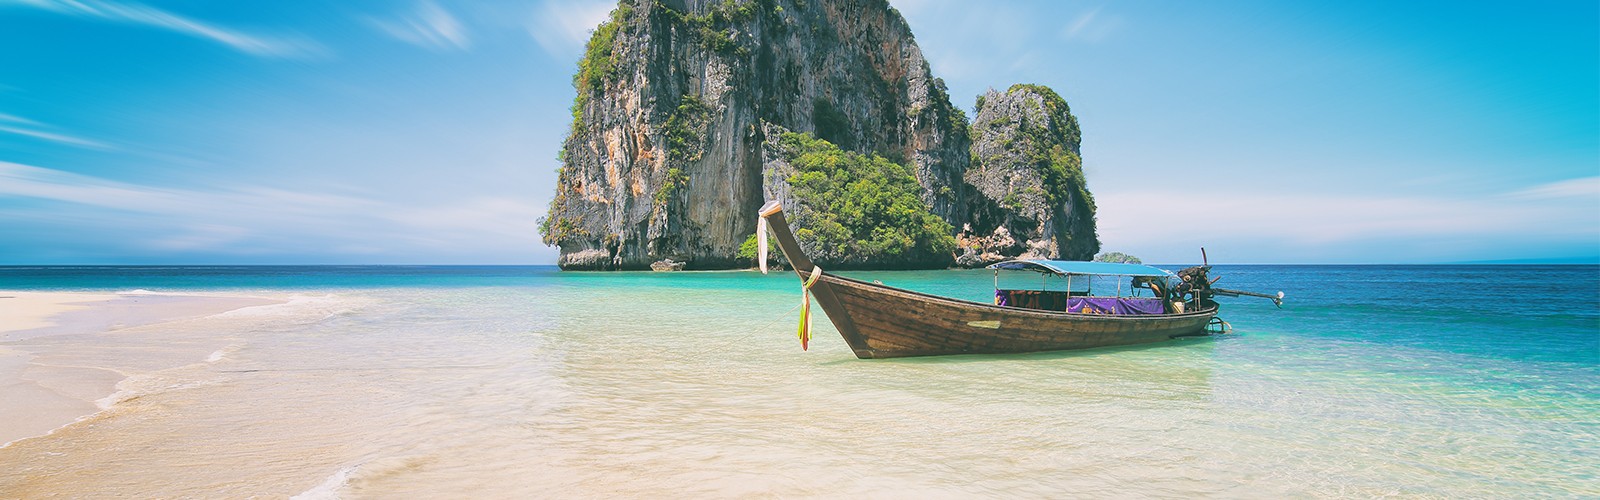 header - Best Places To Visit In Thailand - Thailand Holidays Packages